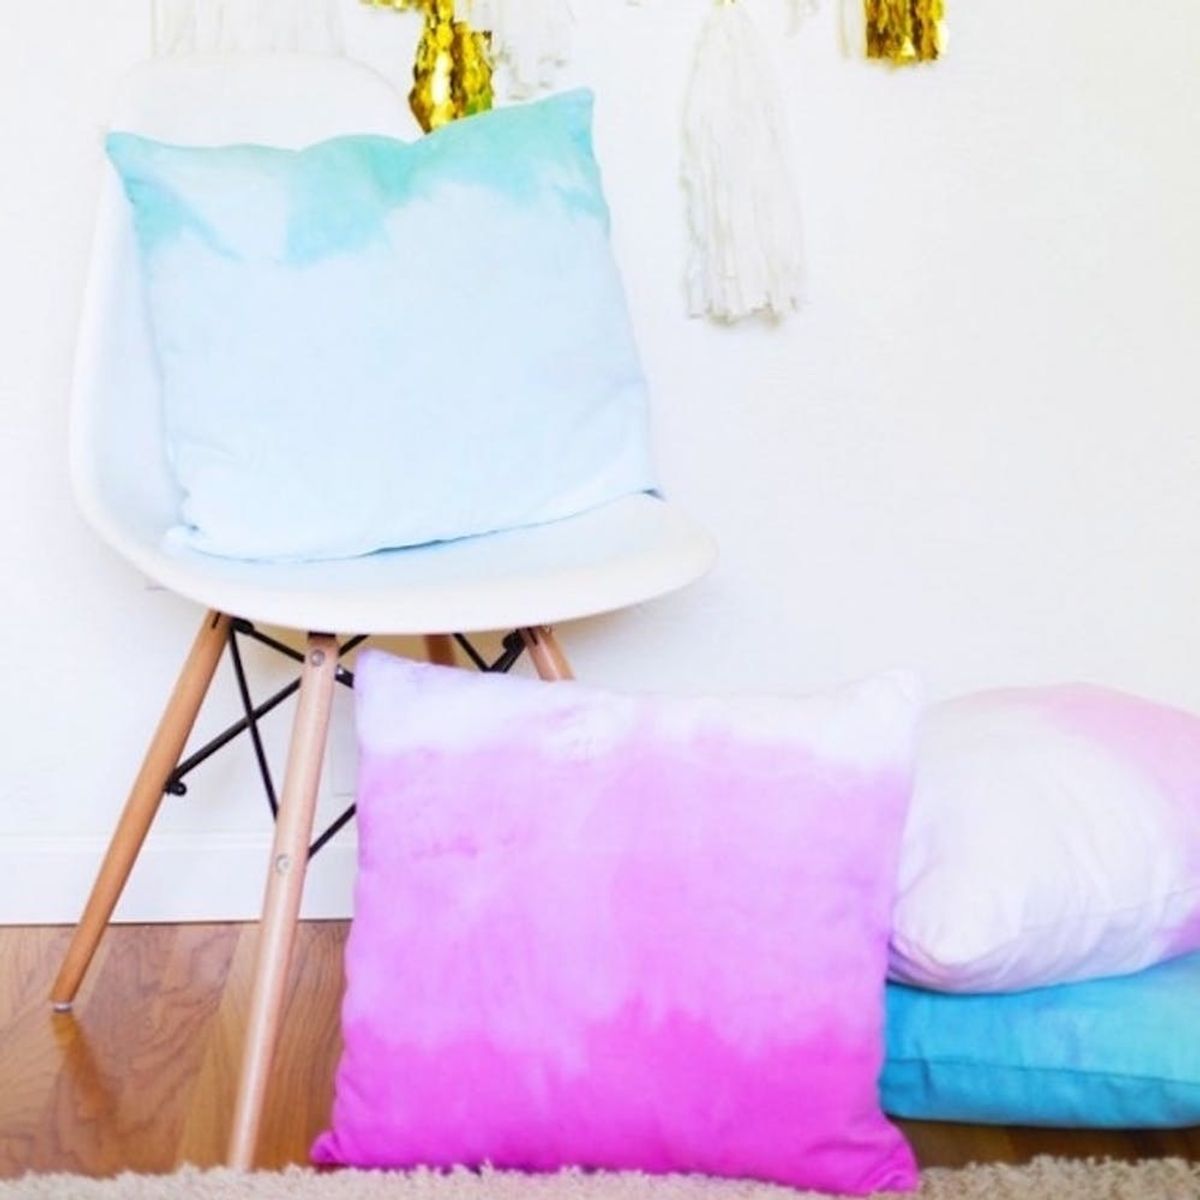 13 Pantone-Inspired DIY Projects